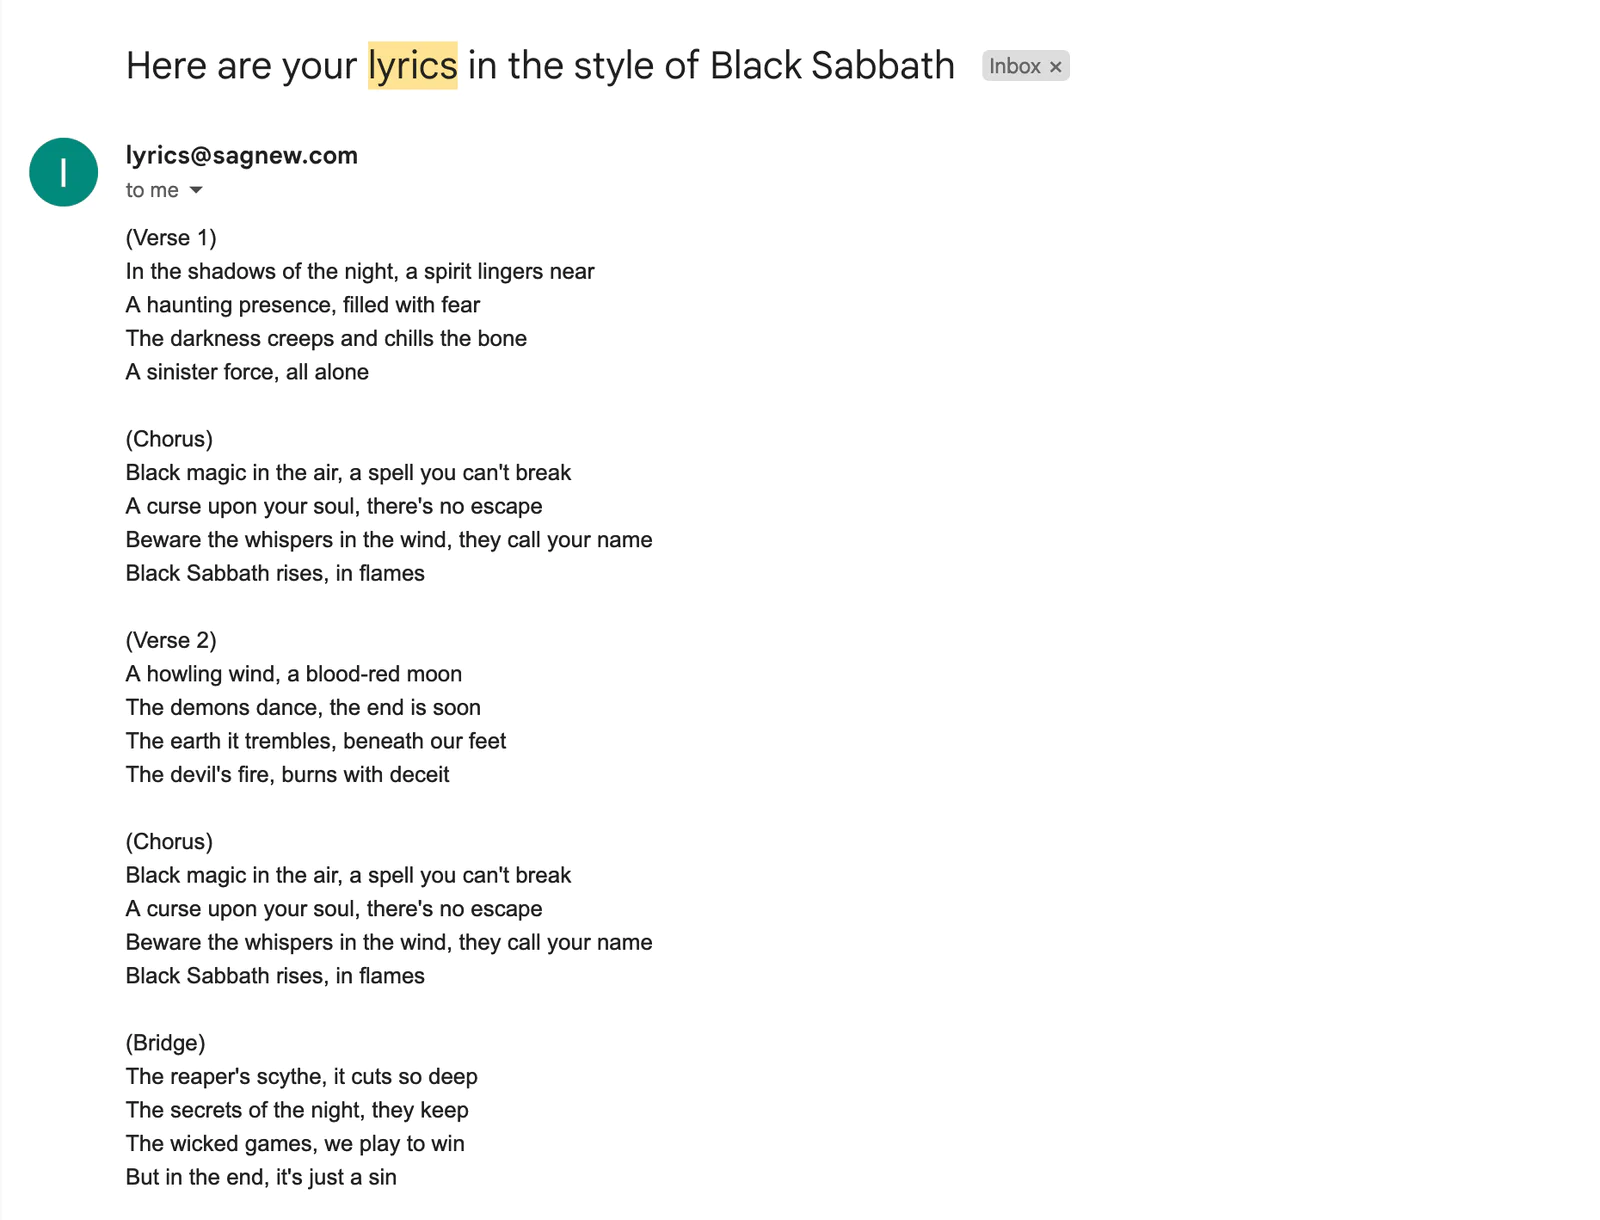 An email containing computer-generated lyrics in the style of Black Sabbath